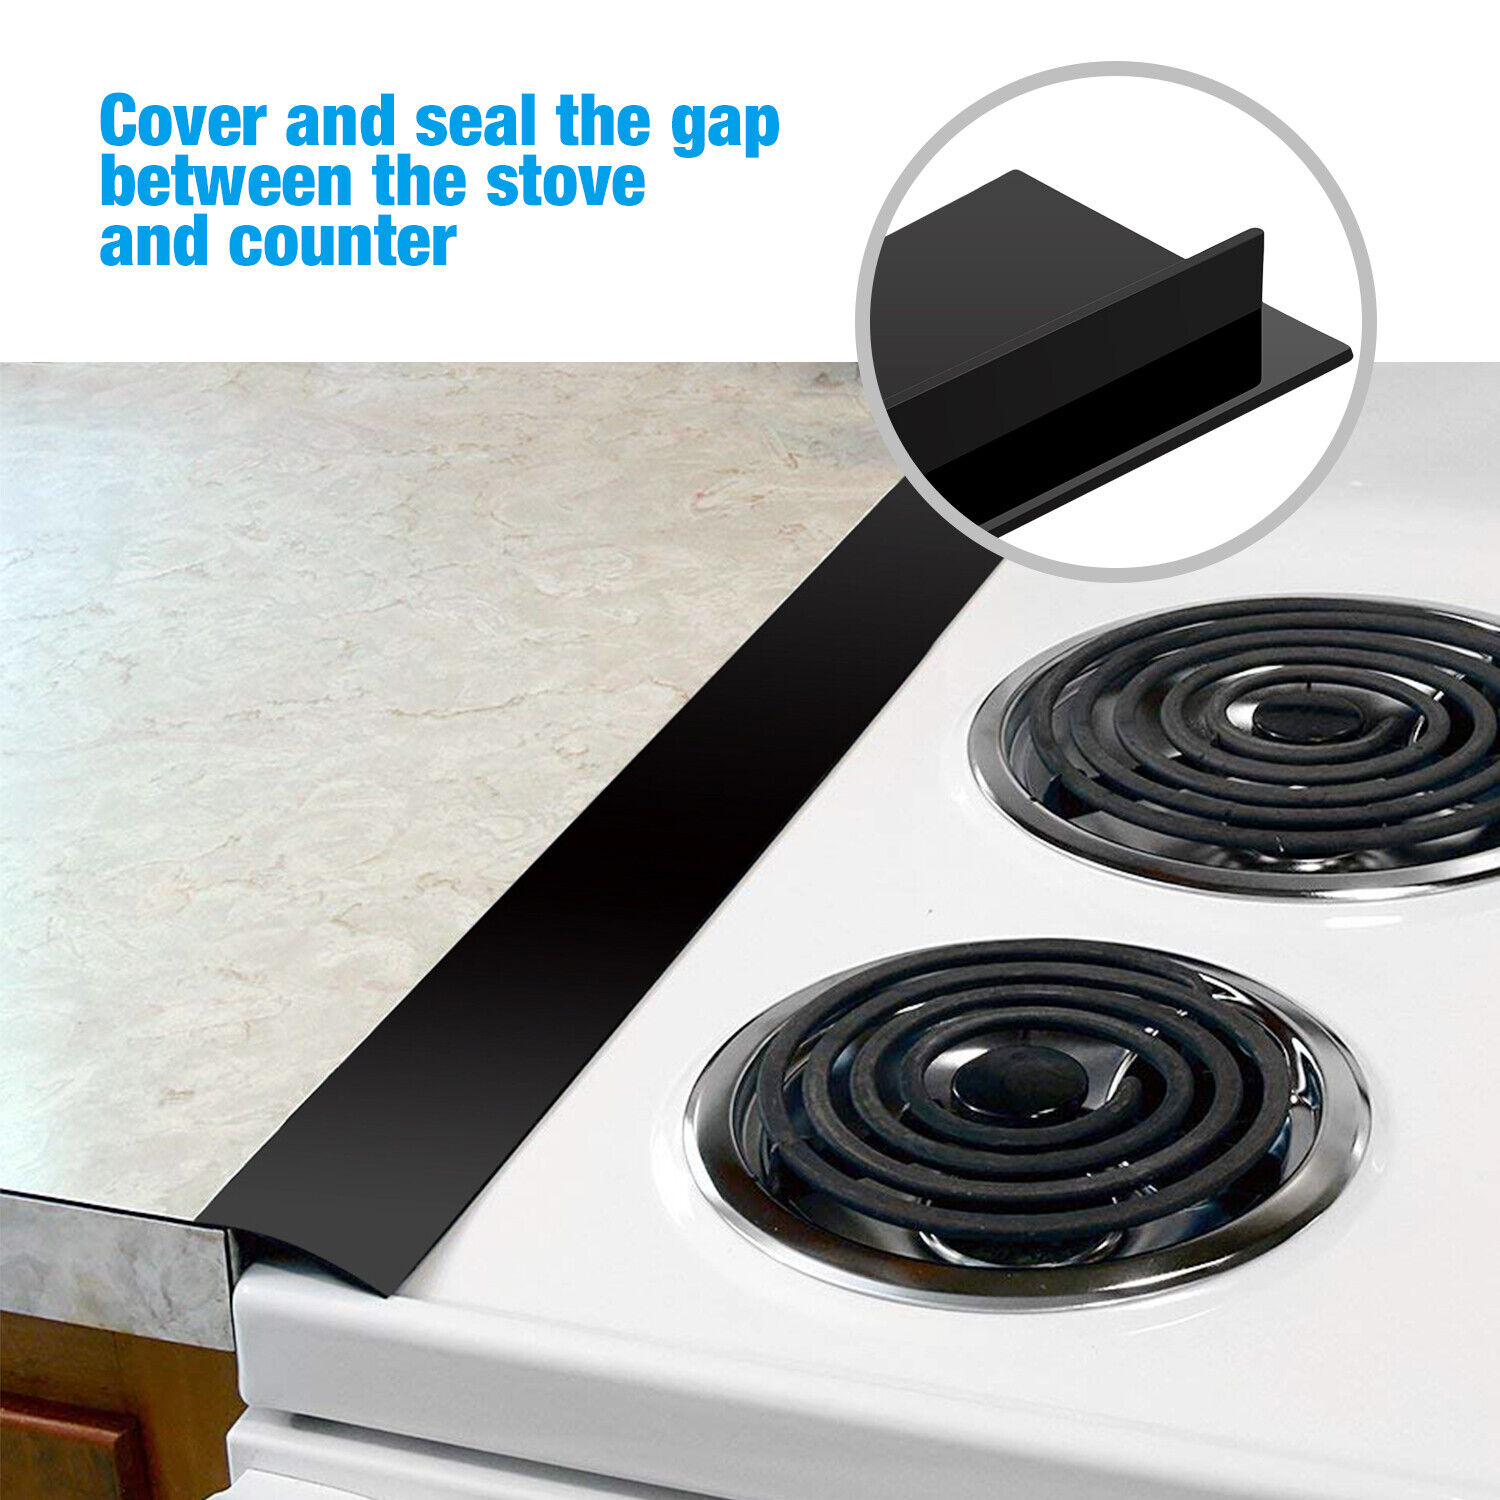 2X Silicone Kitchen Stove Counter Gap Cover Oven Guard Spill Seal Slit Filler US Unbranded Does not apply - фотография #6